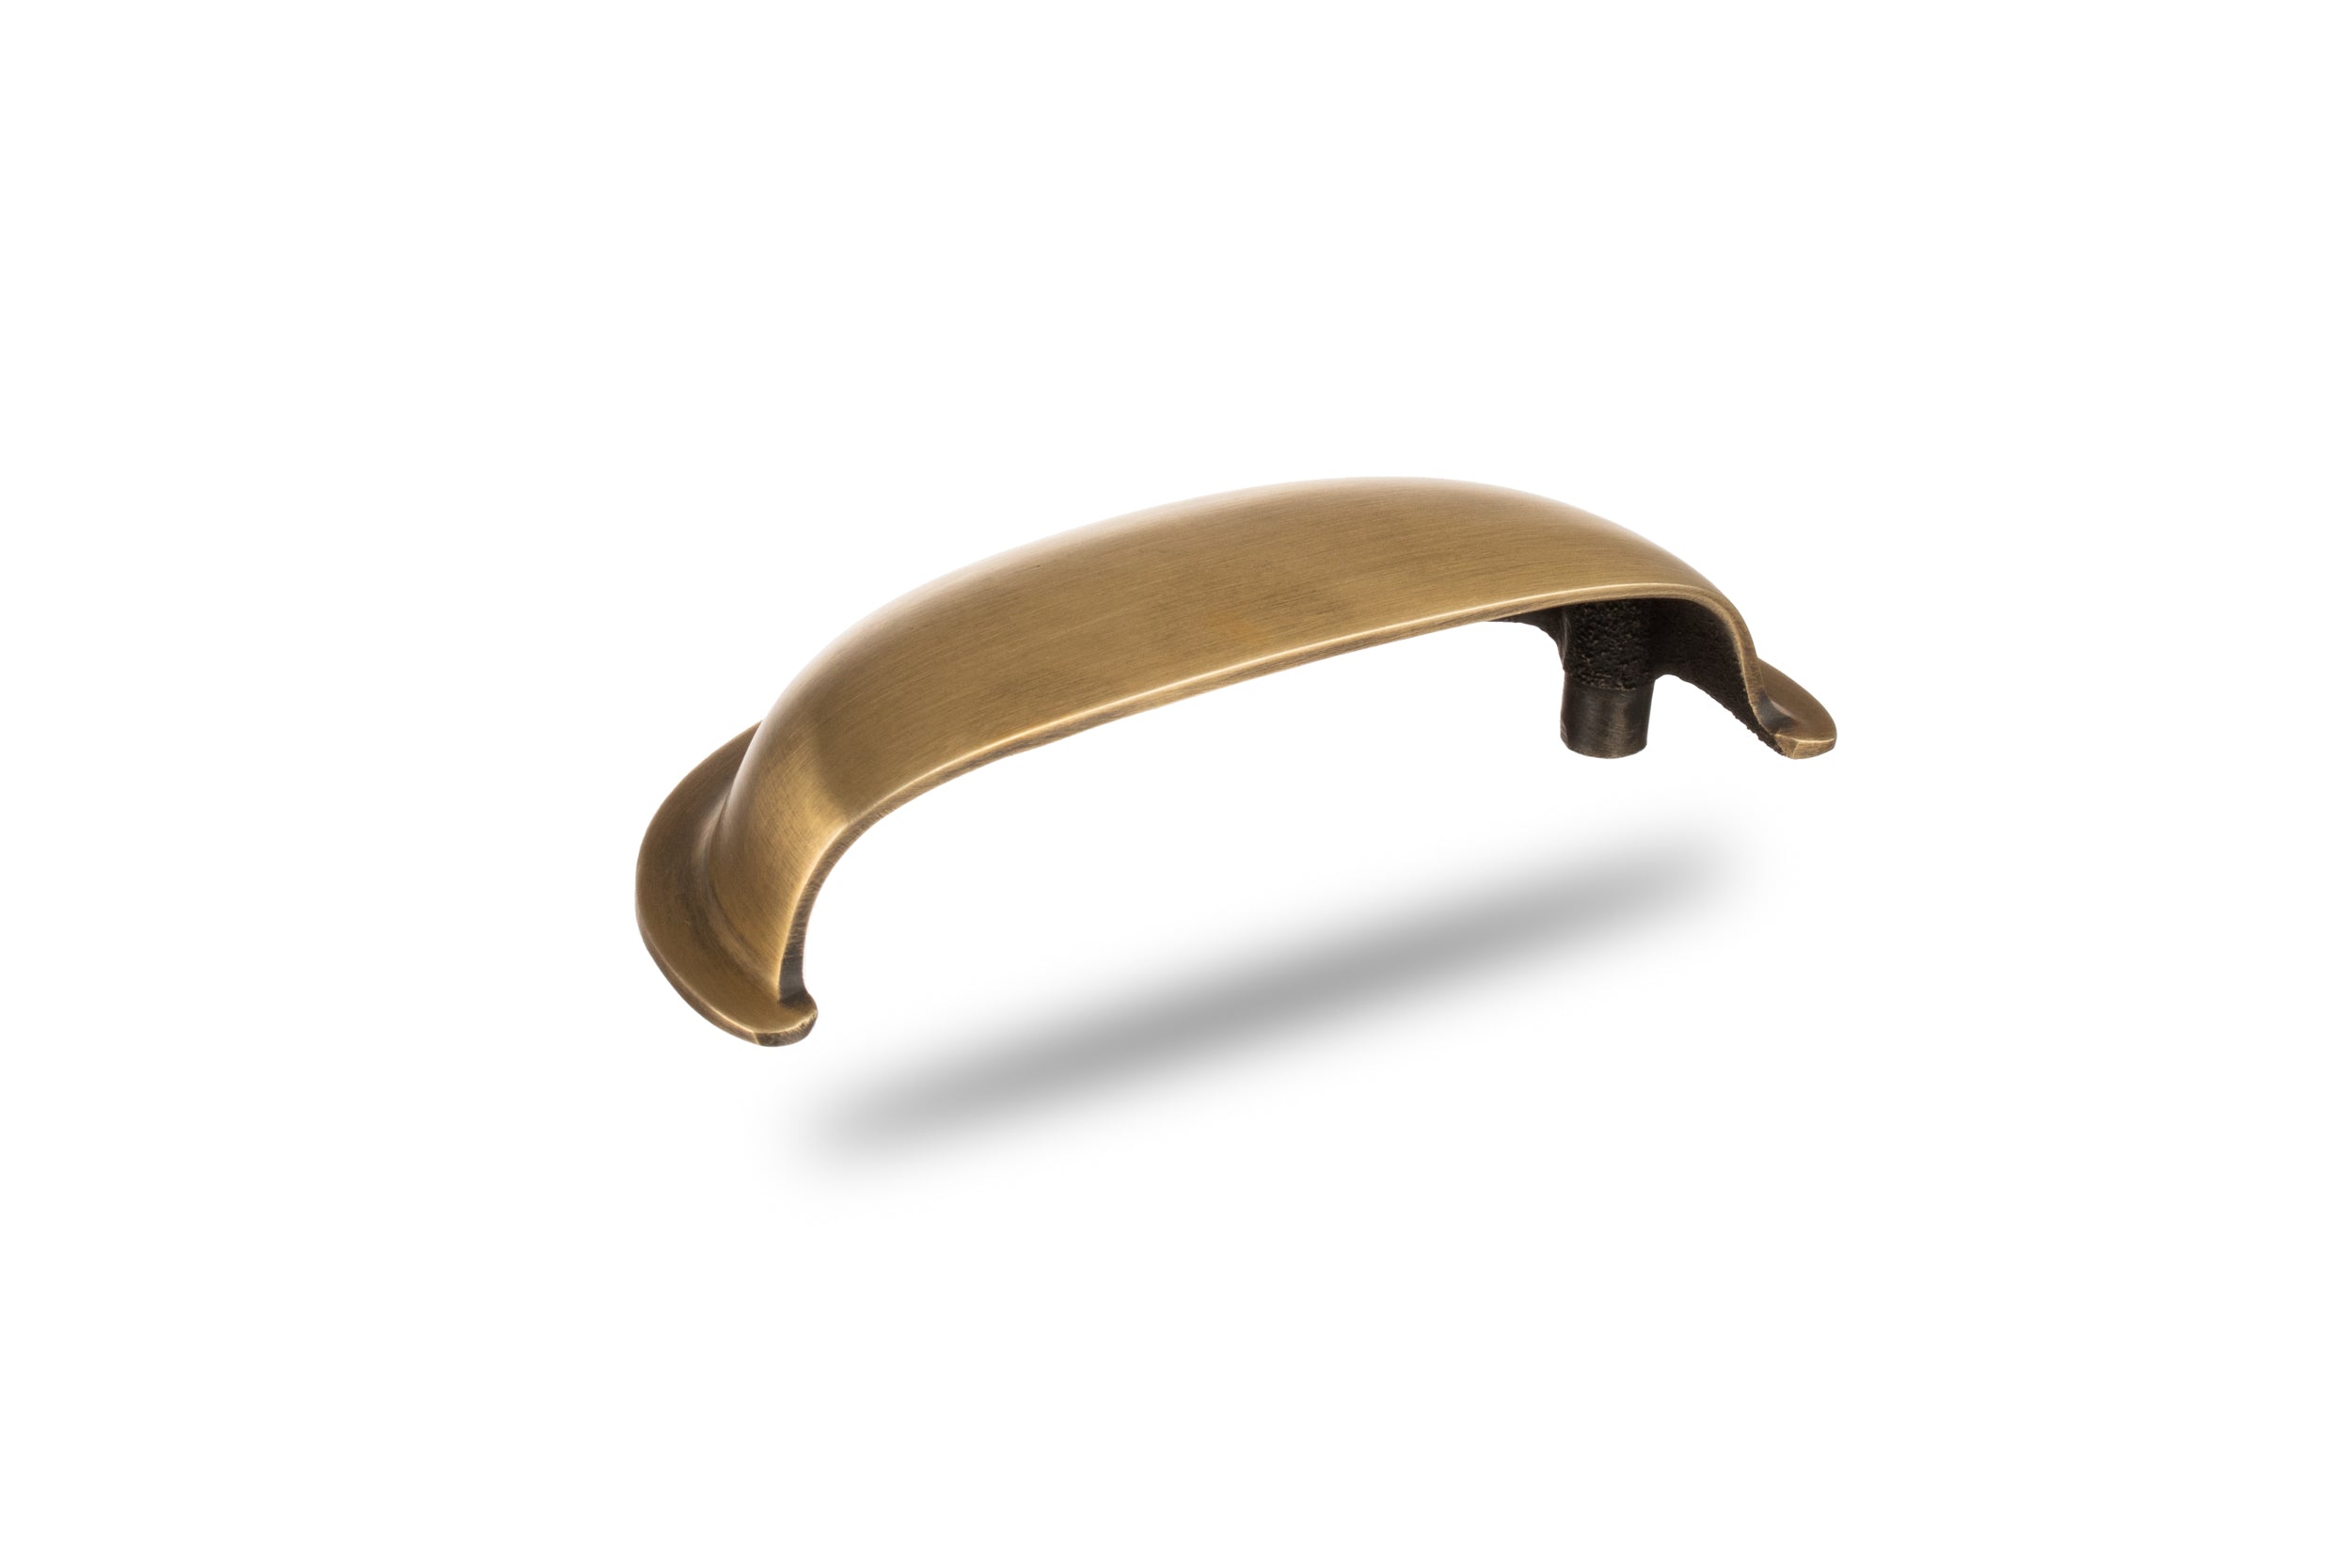 Solid brass wide cup pull handles - 2 sizes 6.5 to 9.5